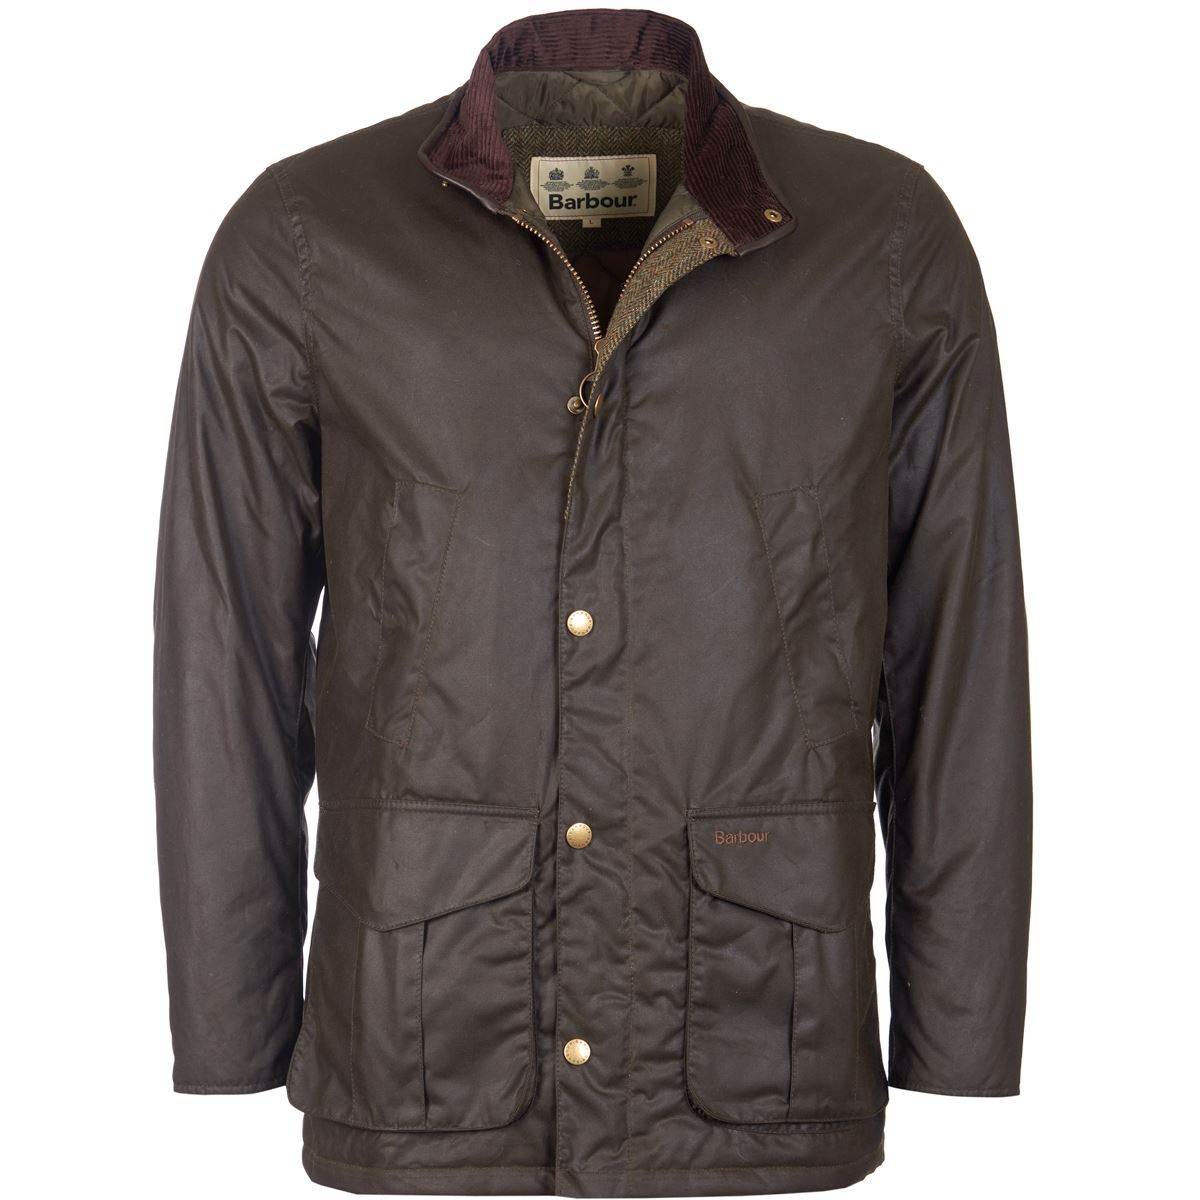 What are the features of the Barbour Hereford Wax Jacket?